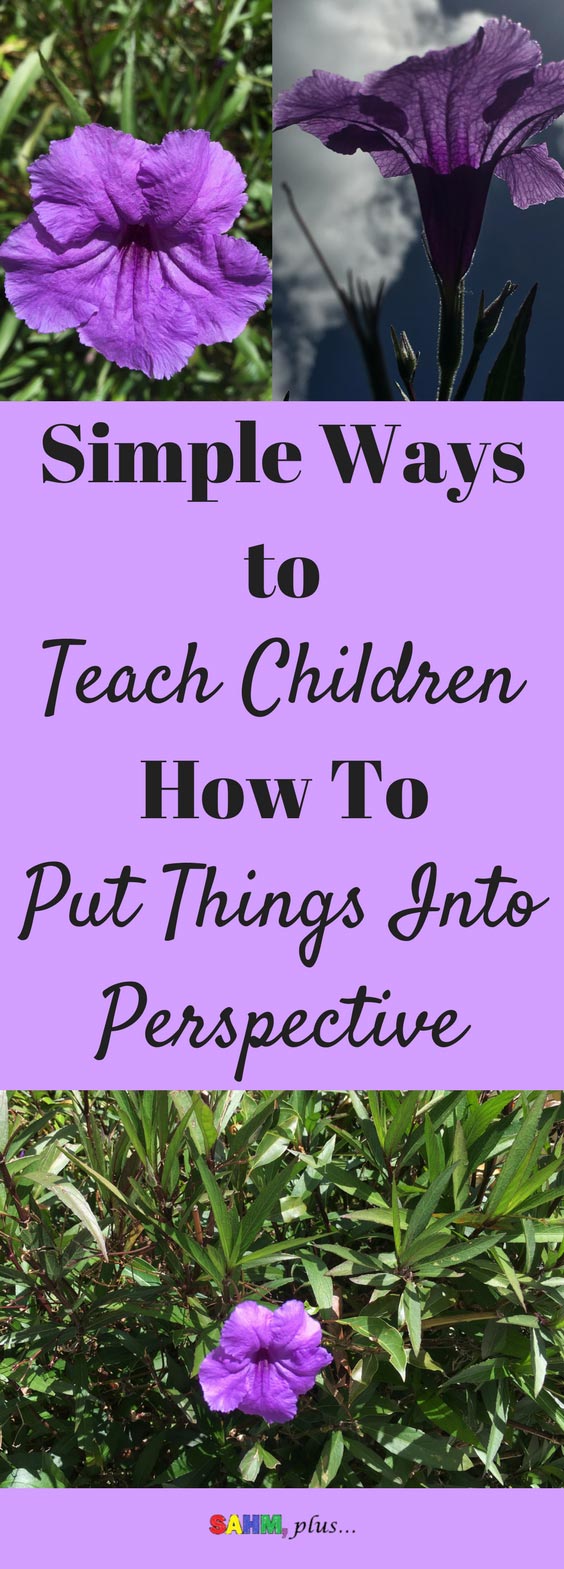 Putting things in perspective during difficult situations can be tough as adults. But, as parents, not only do we need to model this ability, we need to know how to teach our children to put things into perspective. 3 simple strategies for teaching perspective.